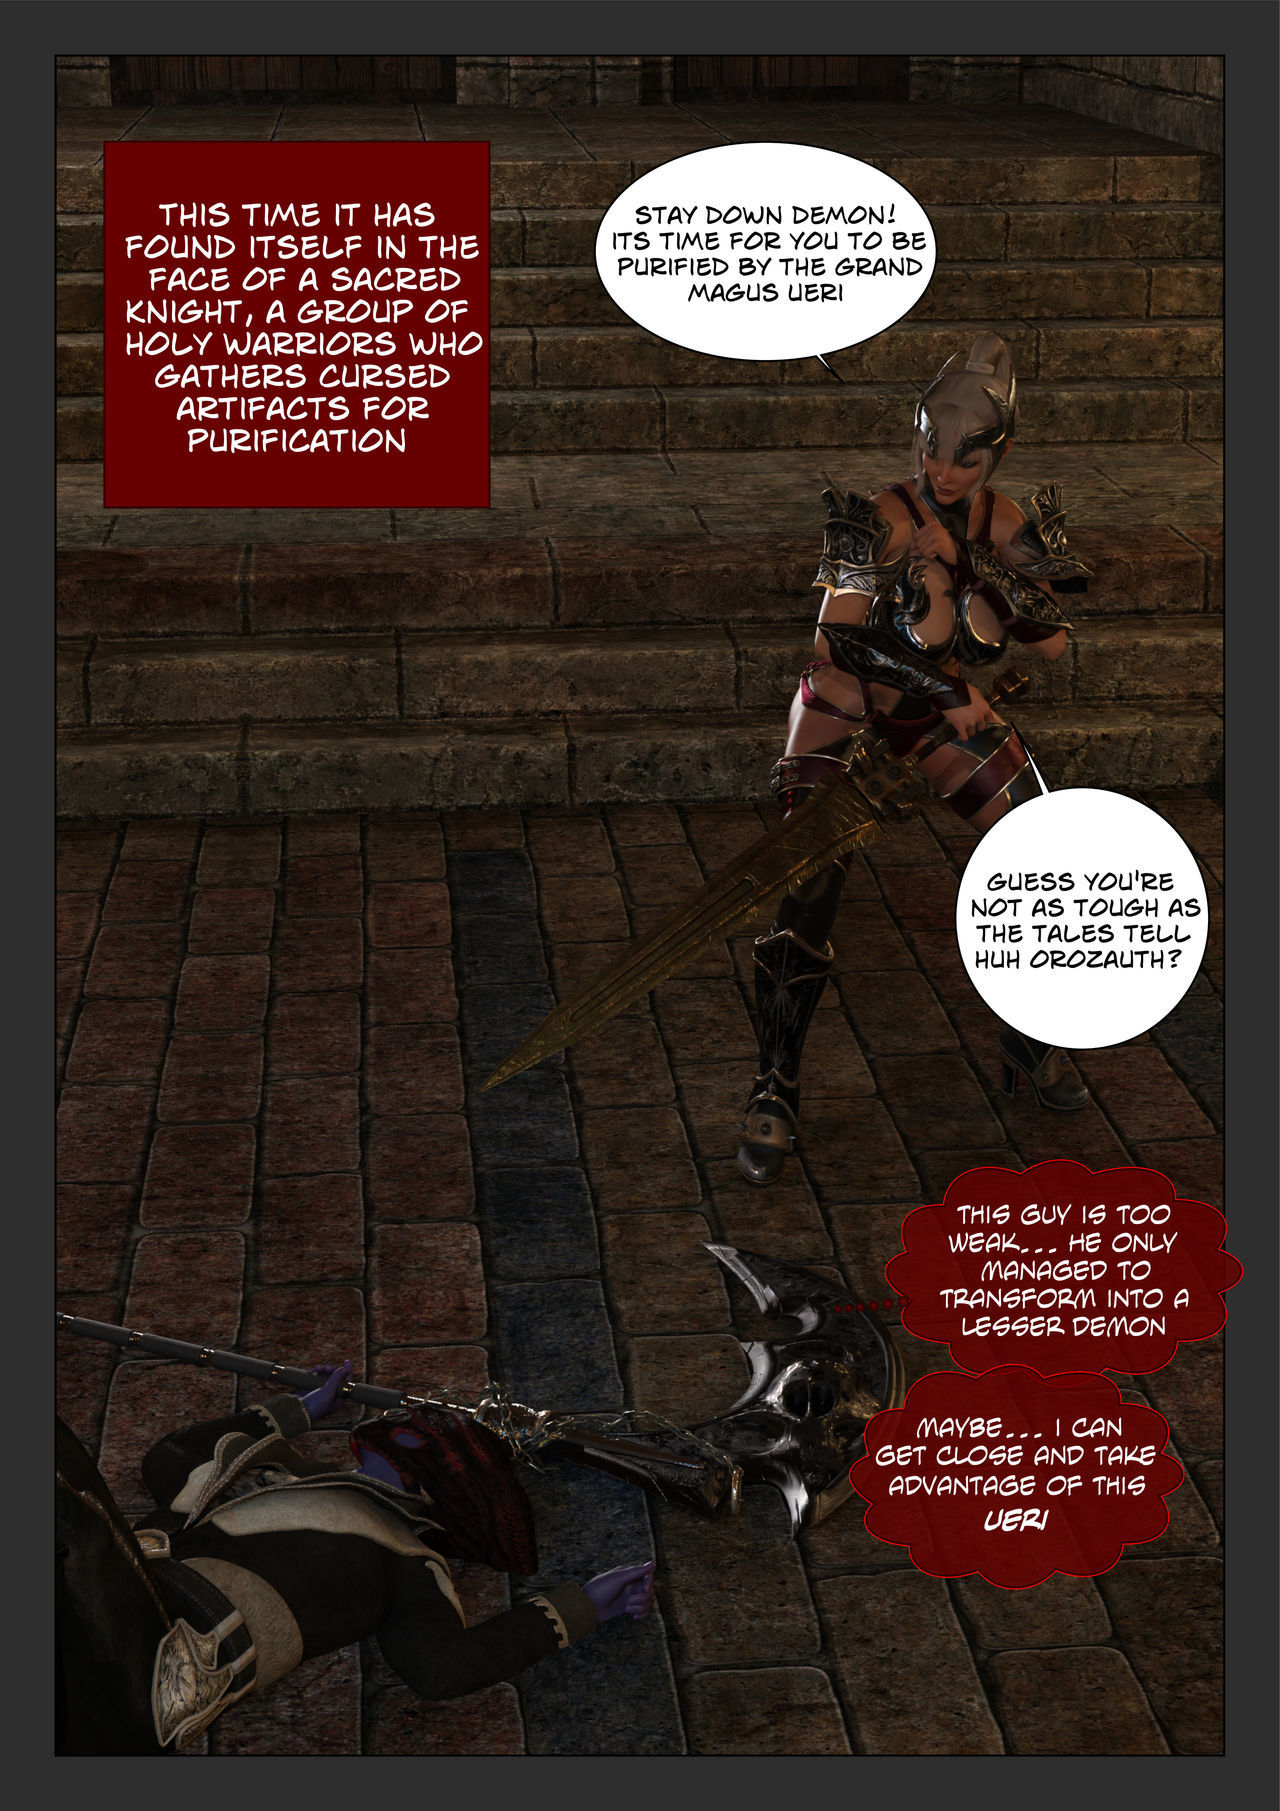 Fall Of The Magus - Verinis Cursed Artifacts page 4